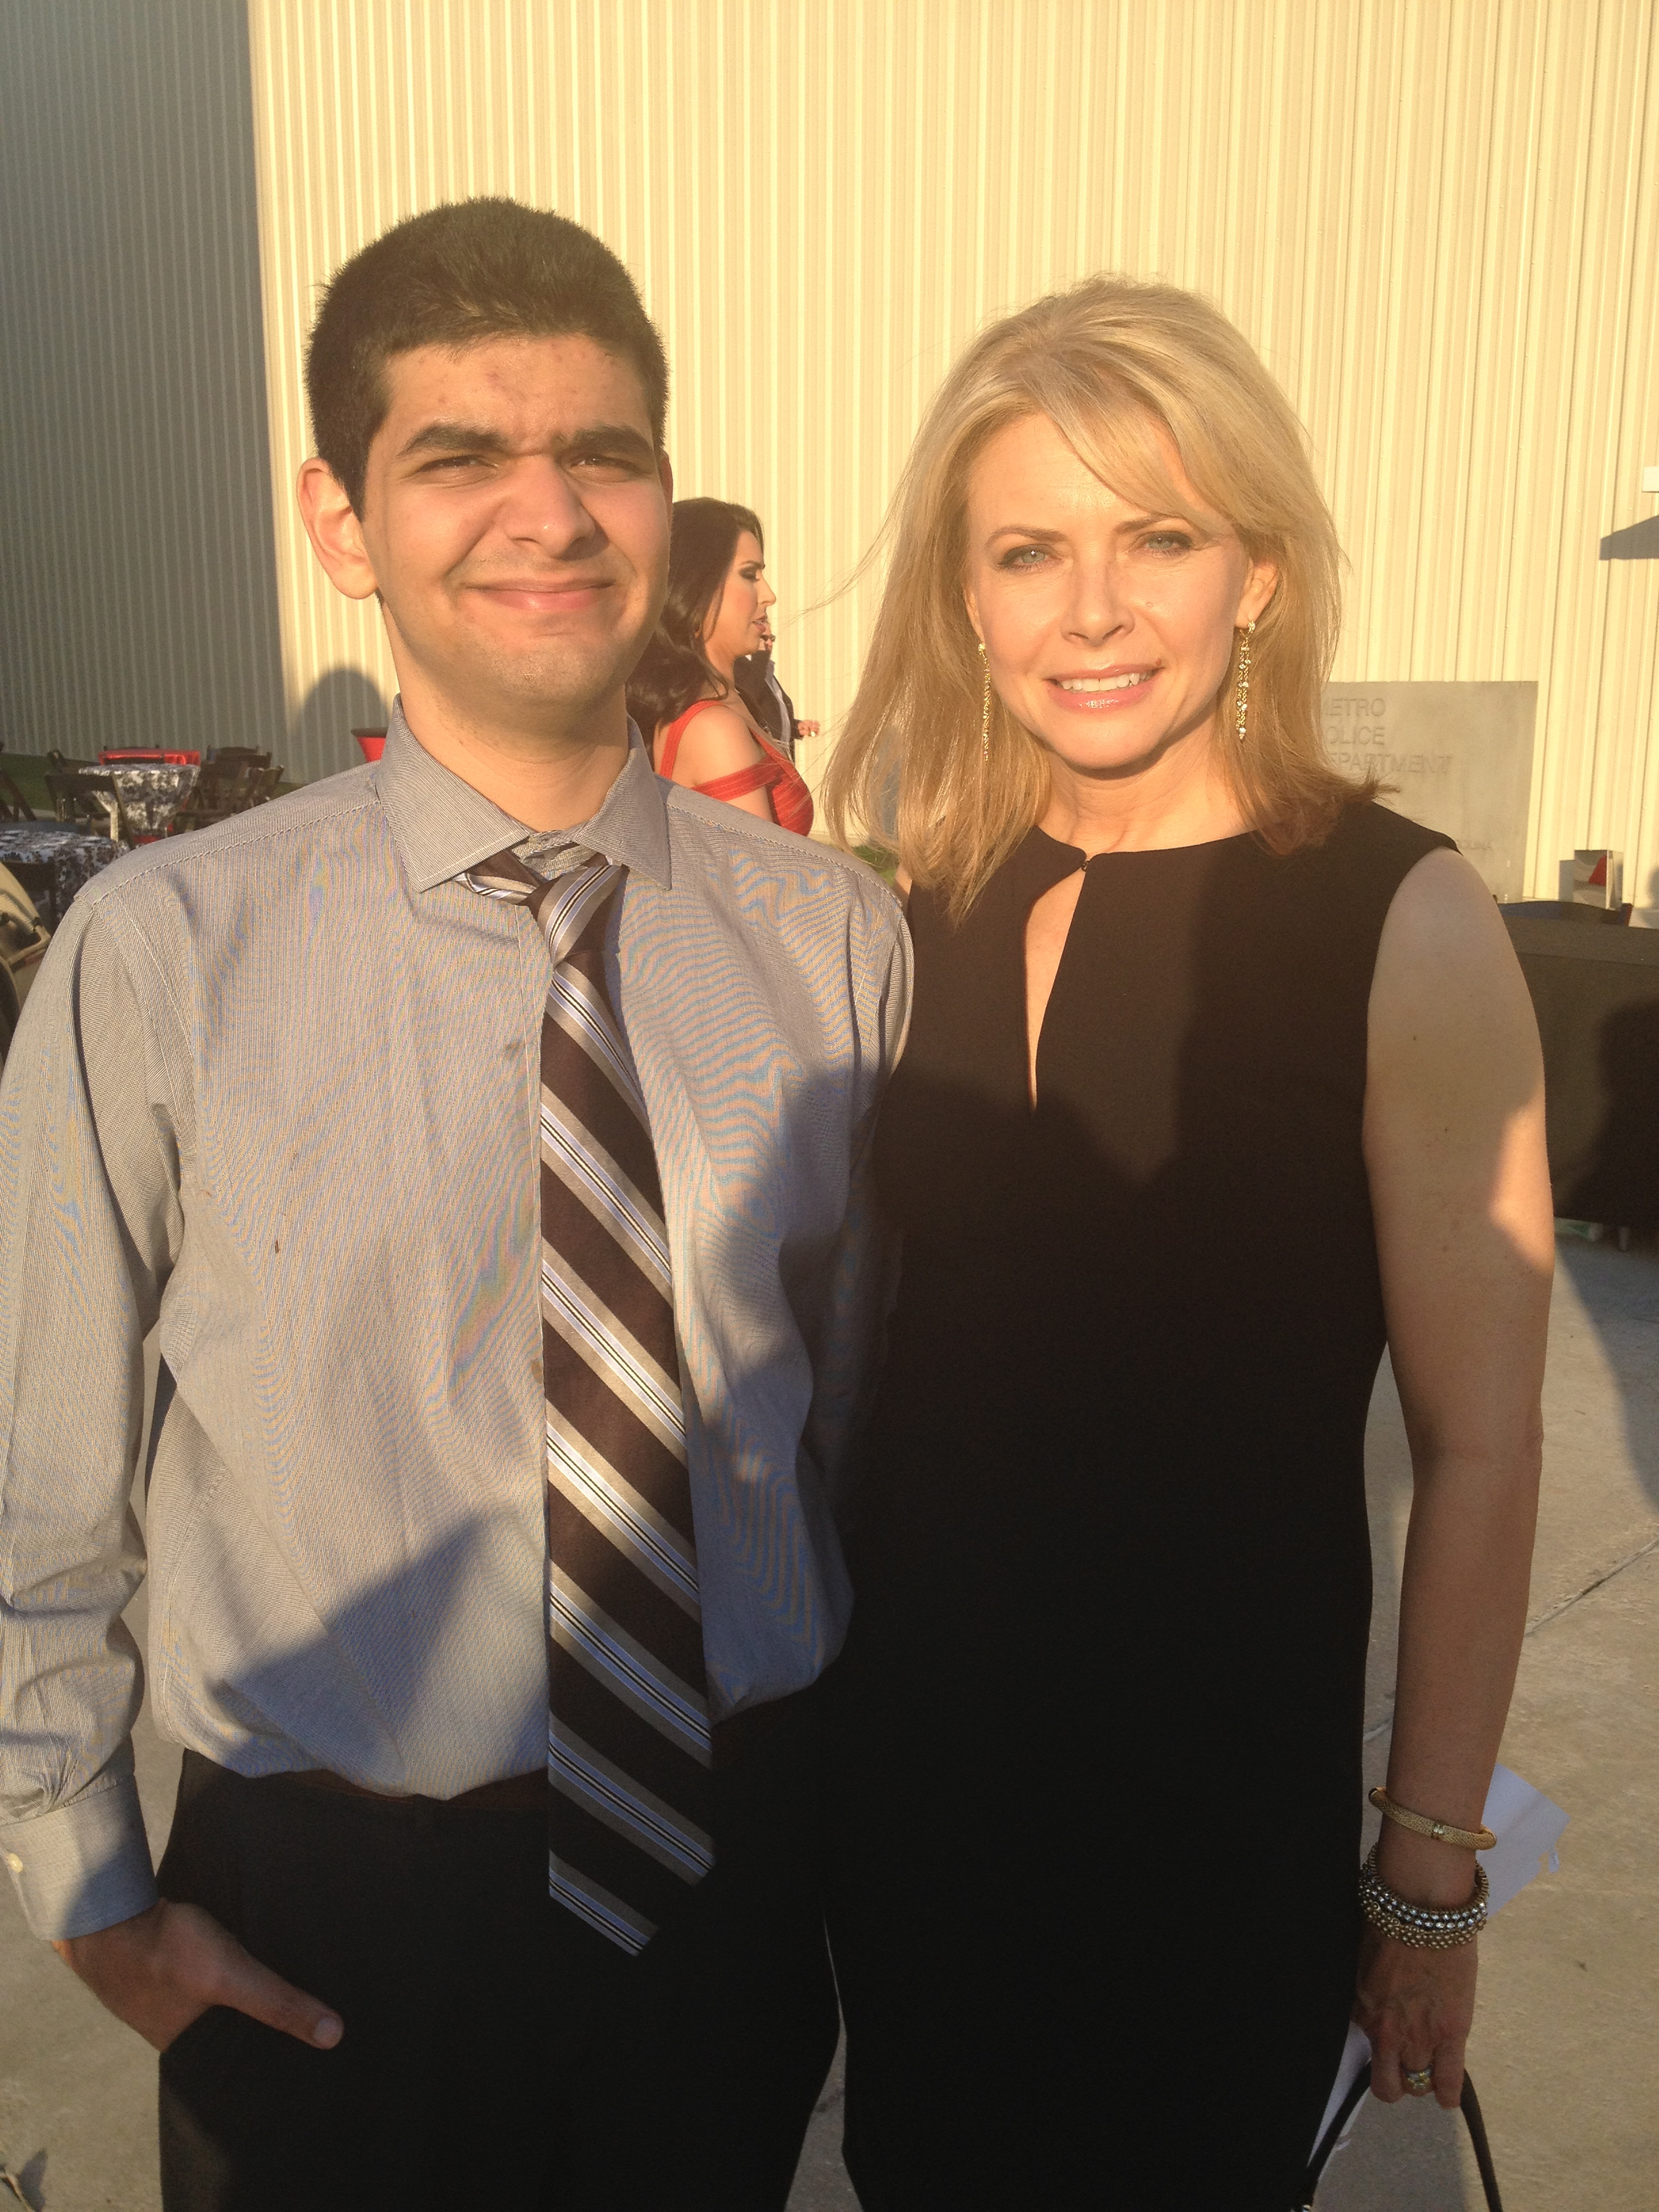 Warren Mitchell and Faith Ford at a Louisiana Film and Entertainment Association event